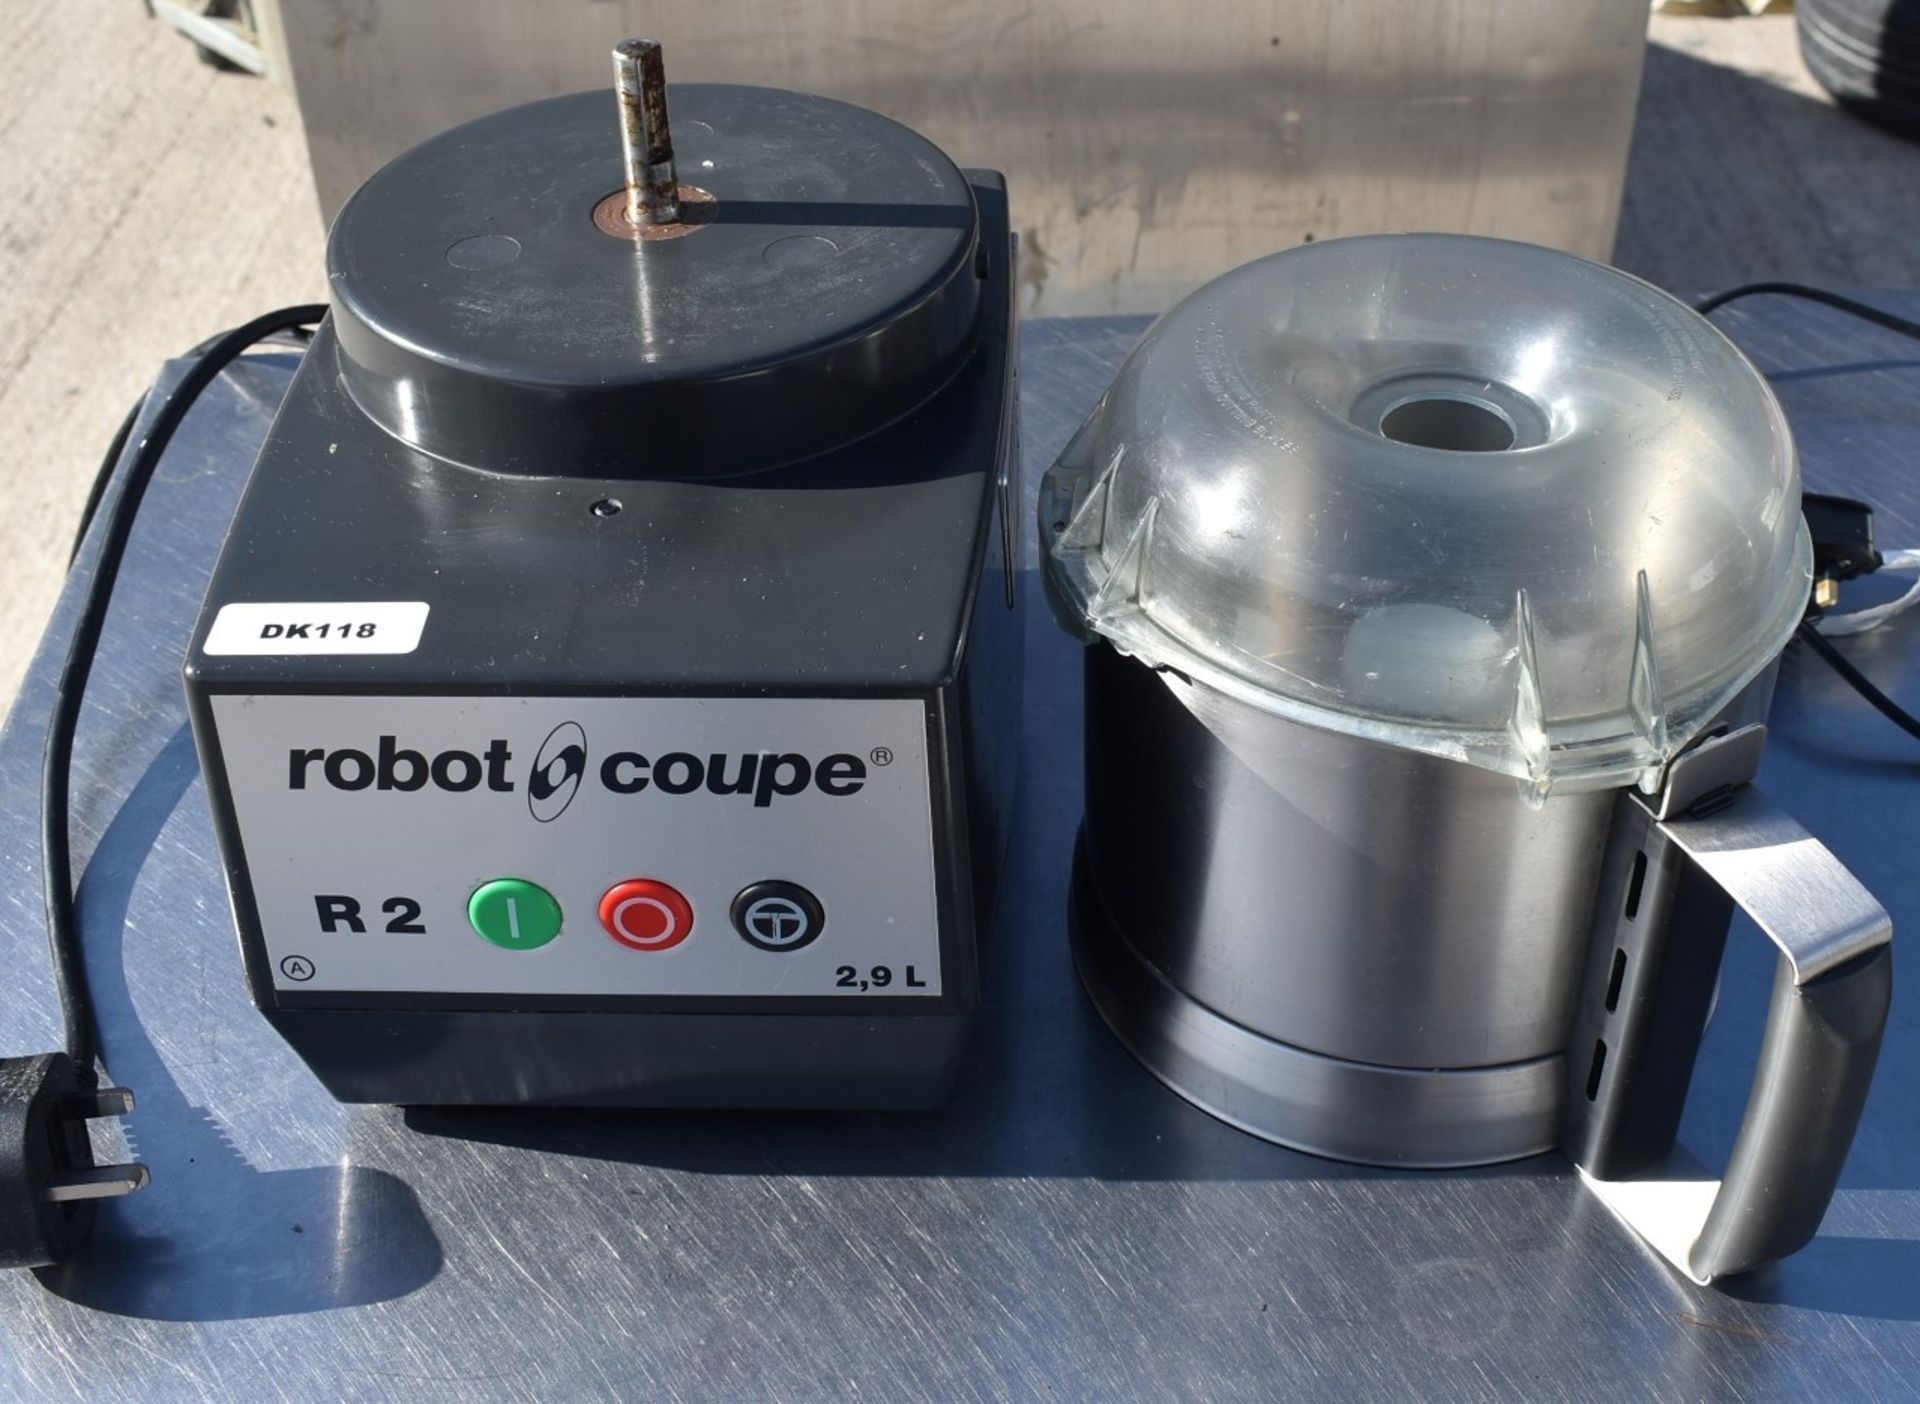 1 x Robot Coupe R2 Heavy Duty Cutter Blender - Recently Removed From a Dark Kitchen Environment - Image 7 of 9